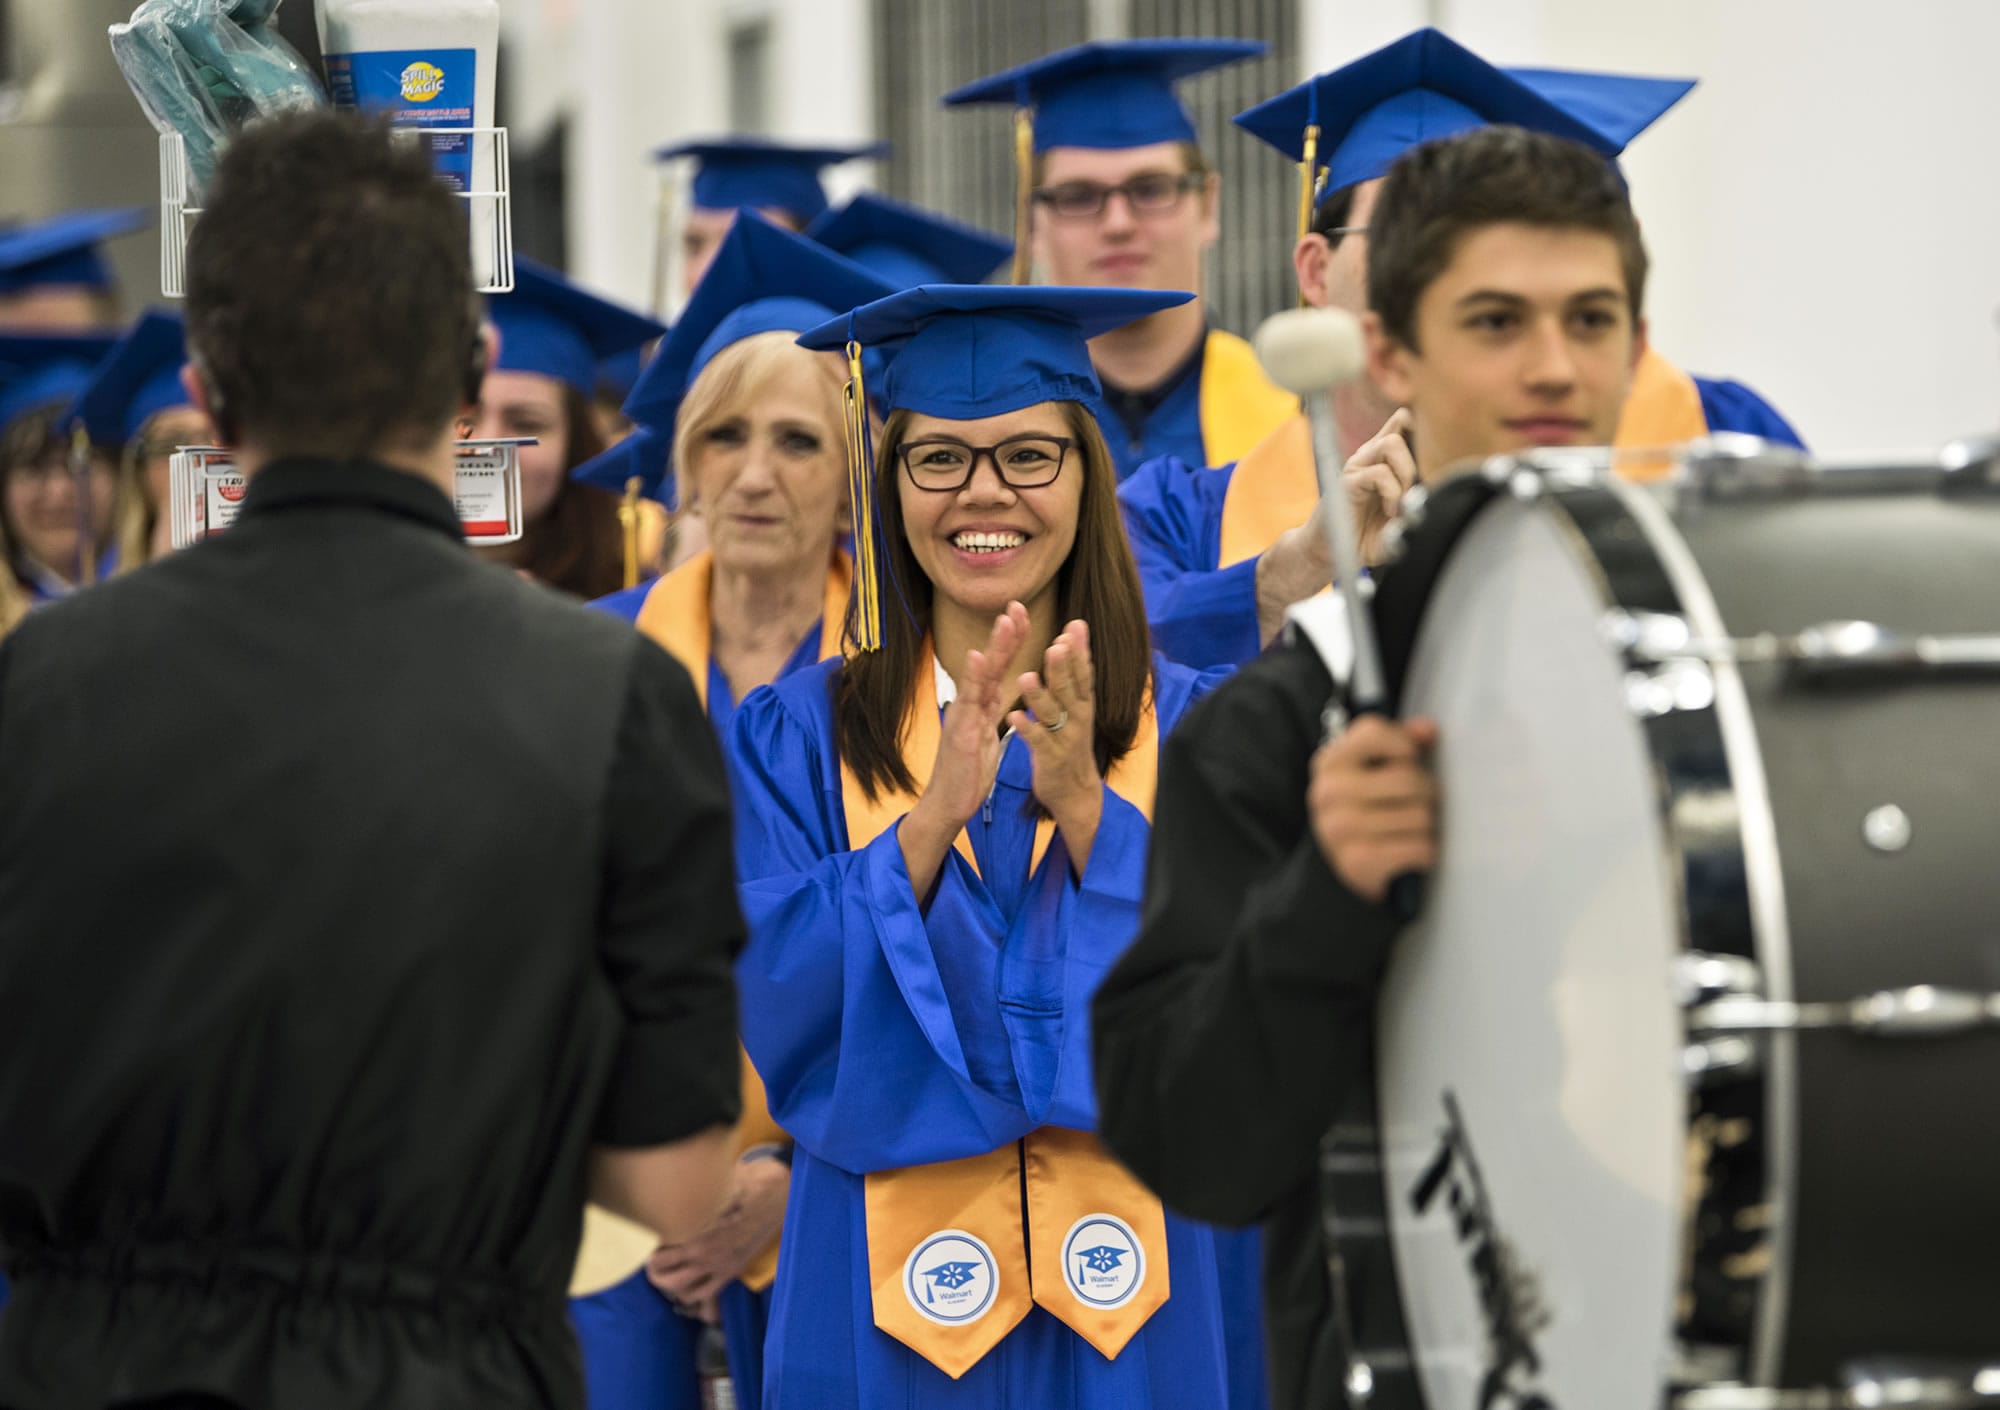 Agnes Abero of Vancouver cheers on the Prairie High School marching band before the first Walmart Academy graduation at the Vancouver Walmart Supercenter on Tuesday morning, Sept. 26, 2017. Members of the marching band paraded the graduates throughout the store at the beginning of the ceremony.